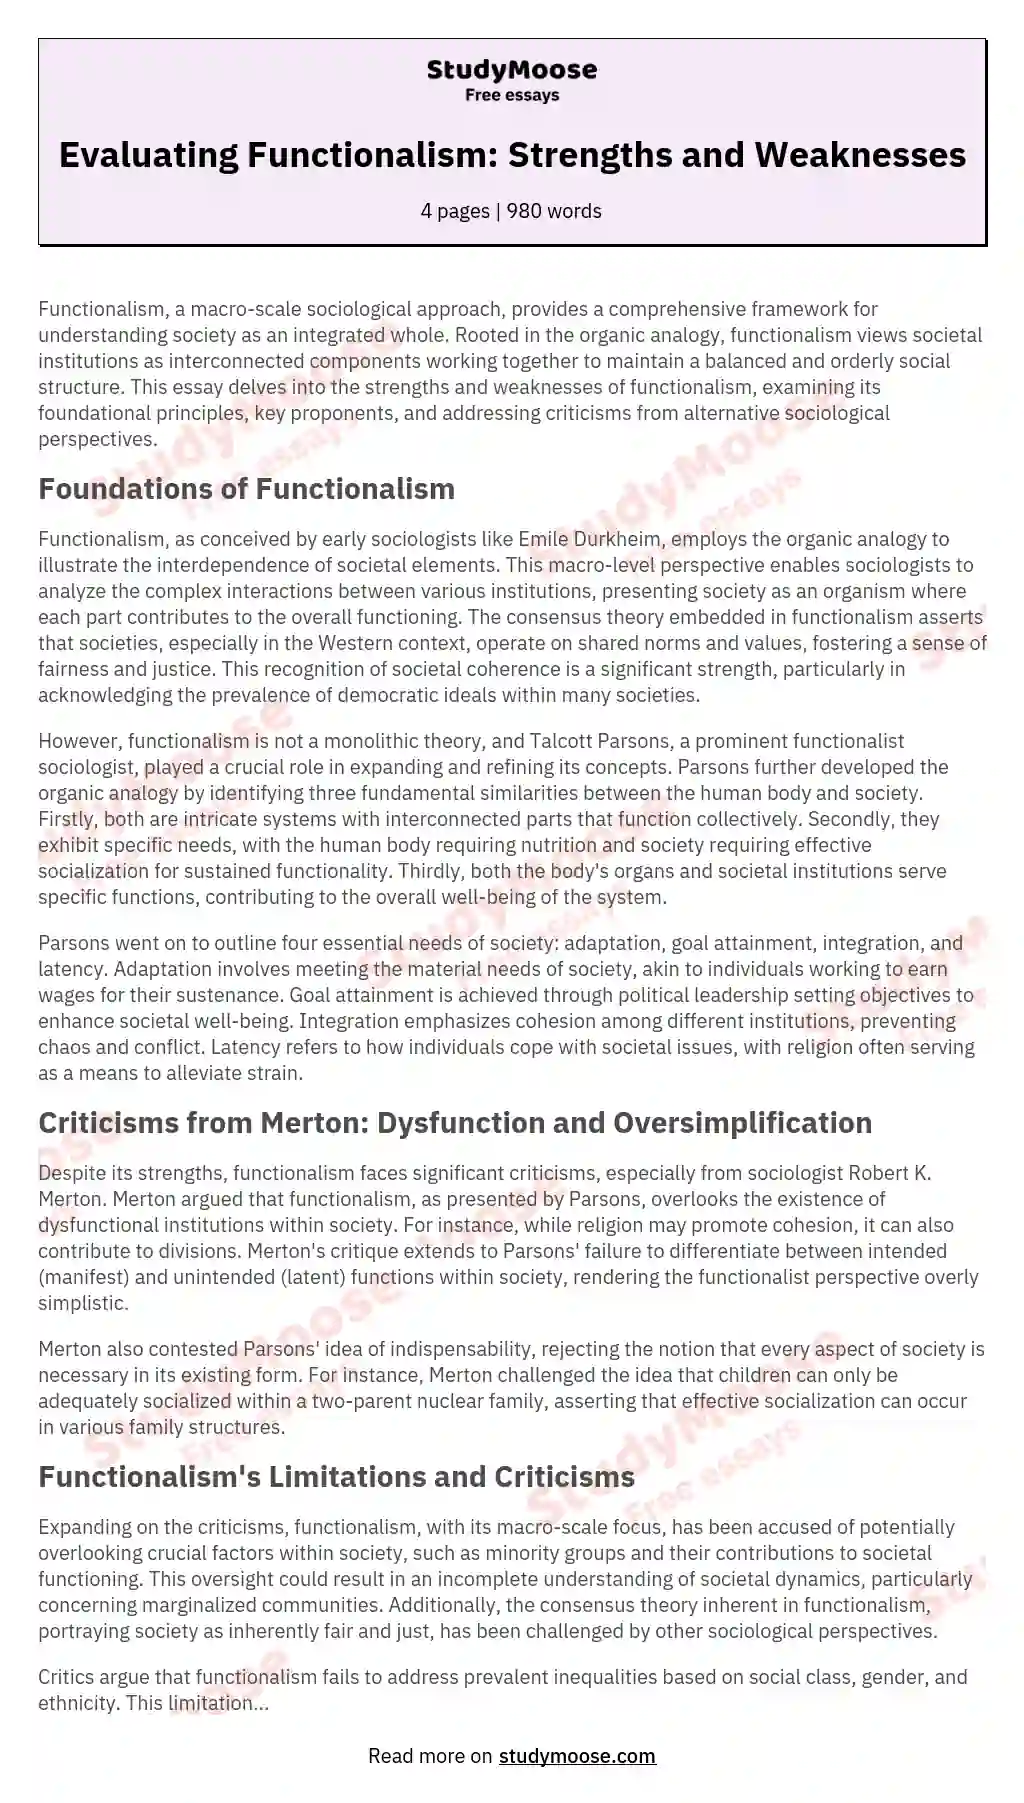 Evaluating Functionalism: Strengths and Weaknesses essay